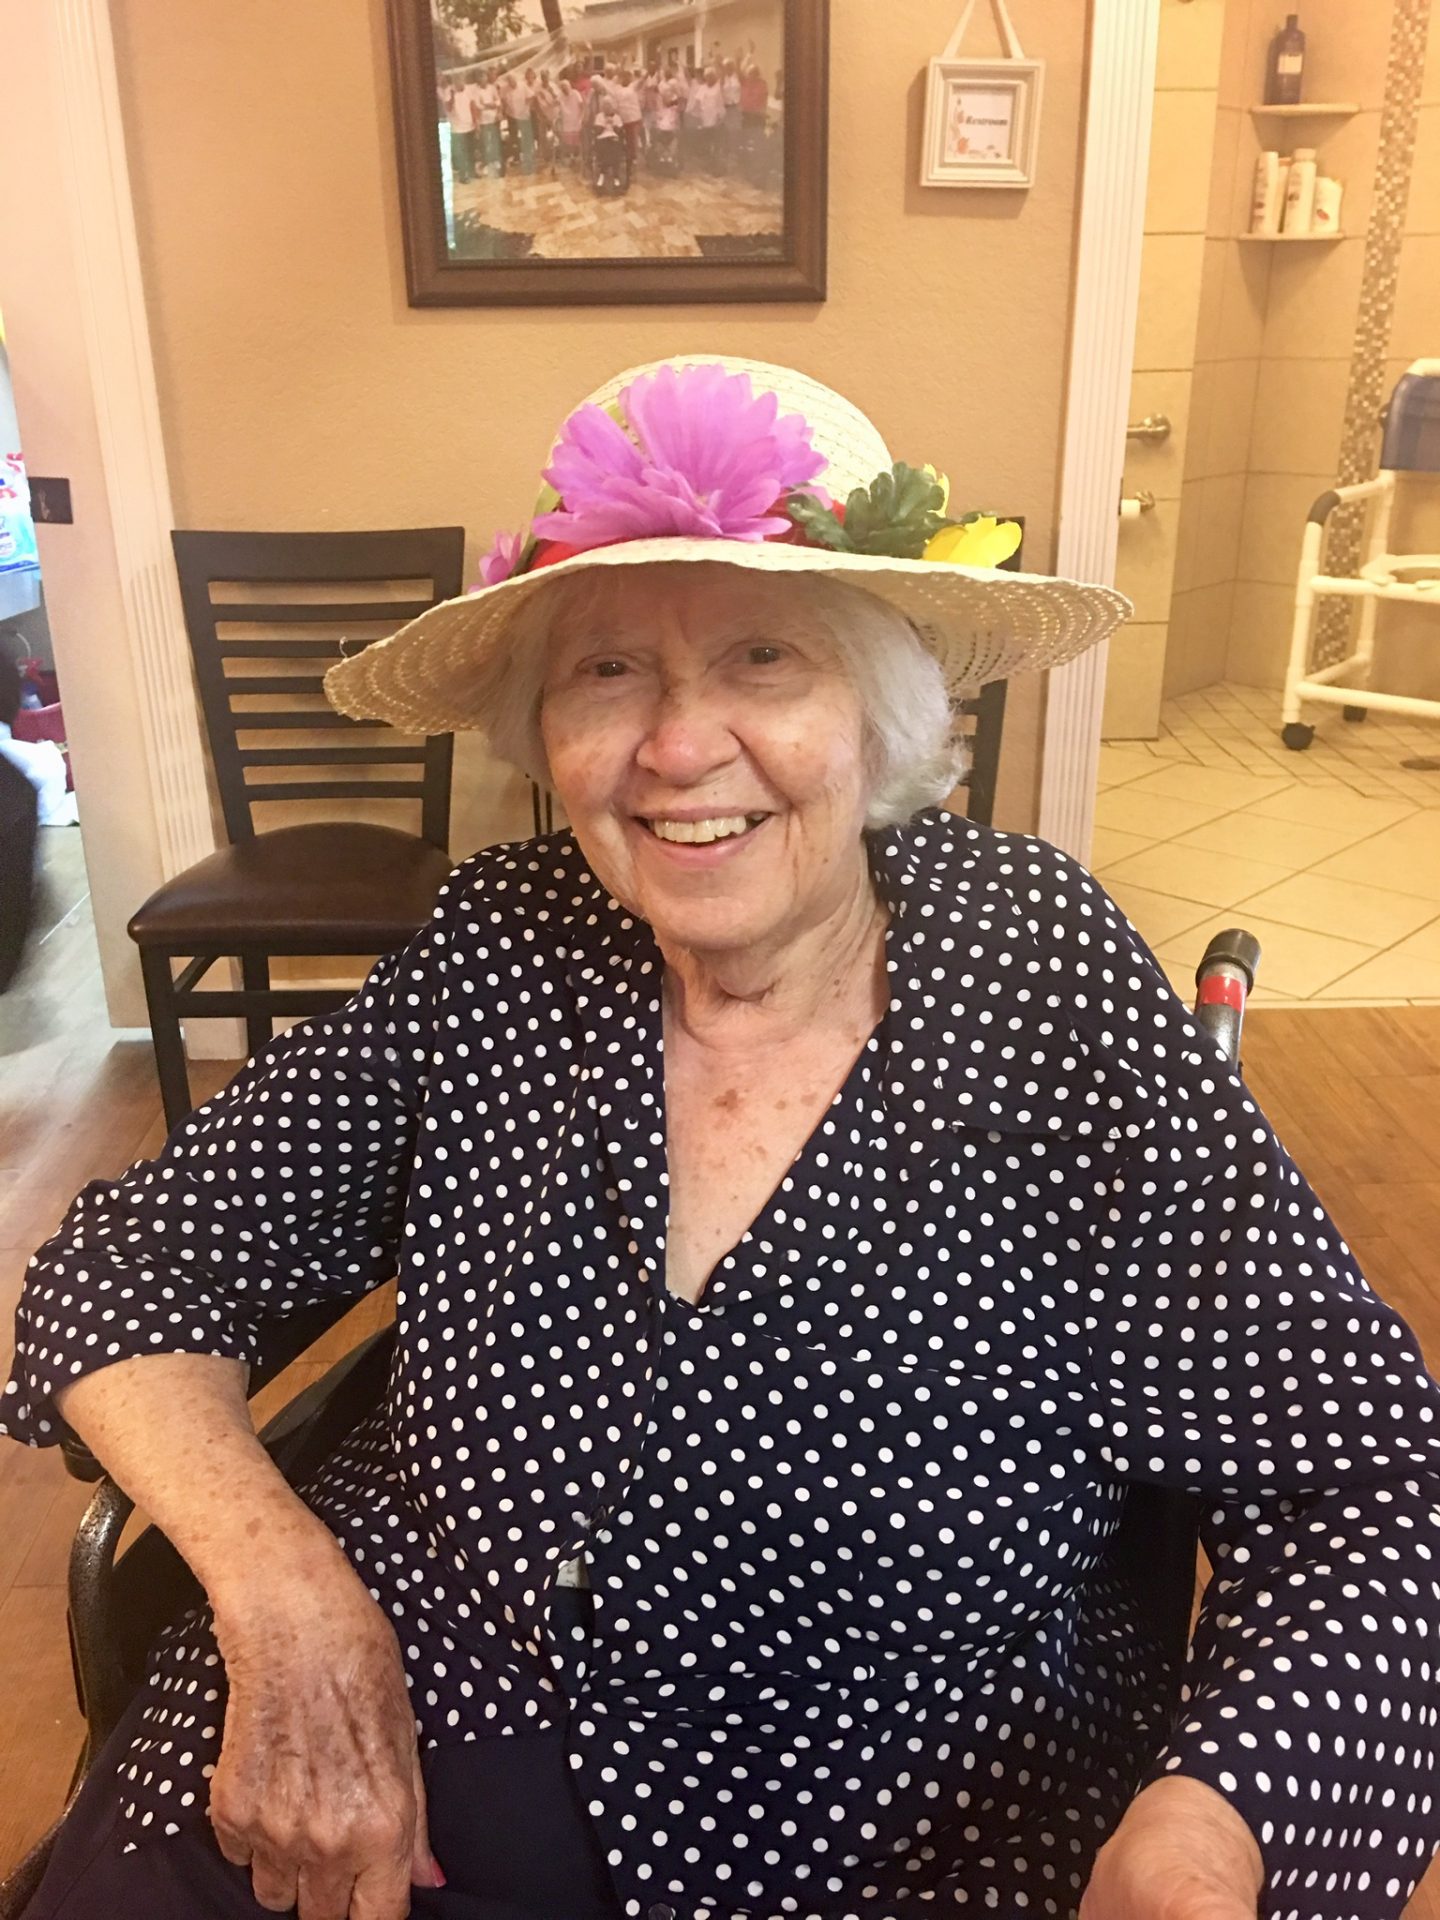 Mom loved her hats!